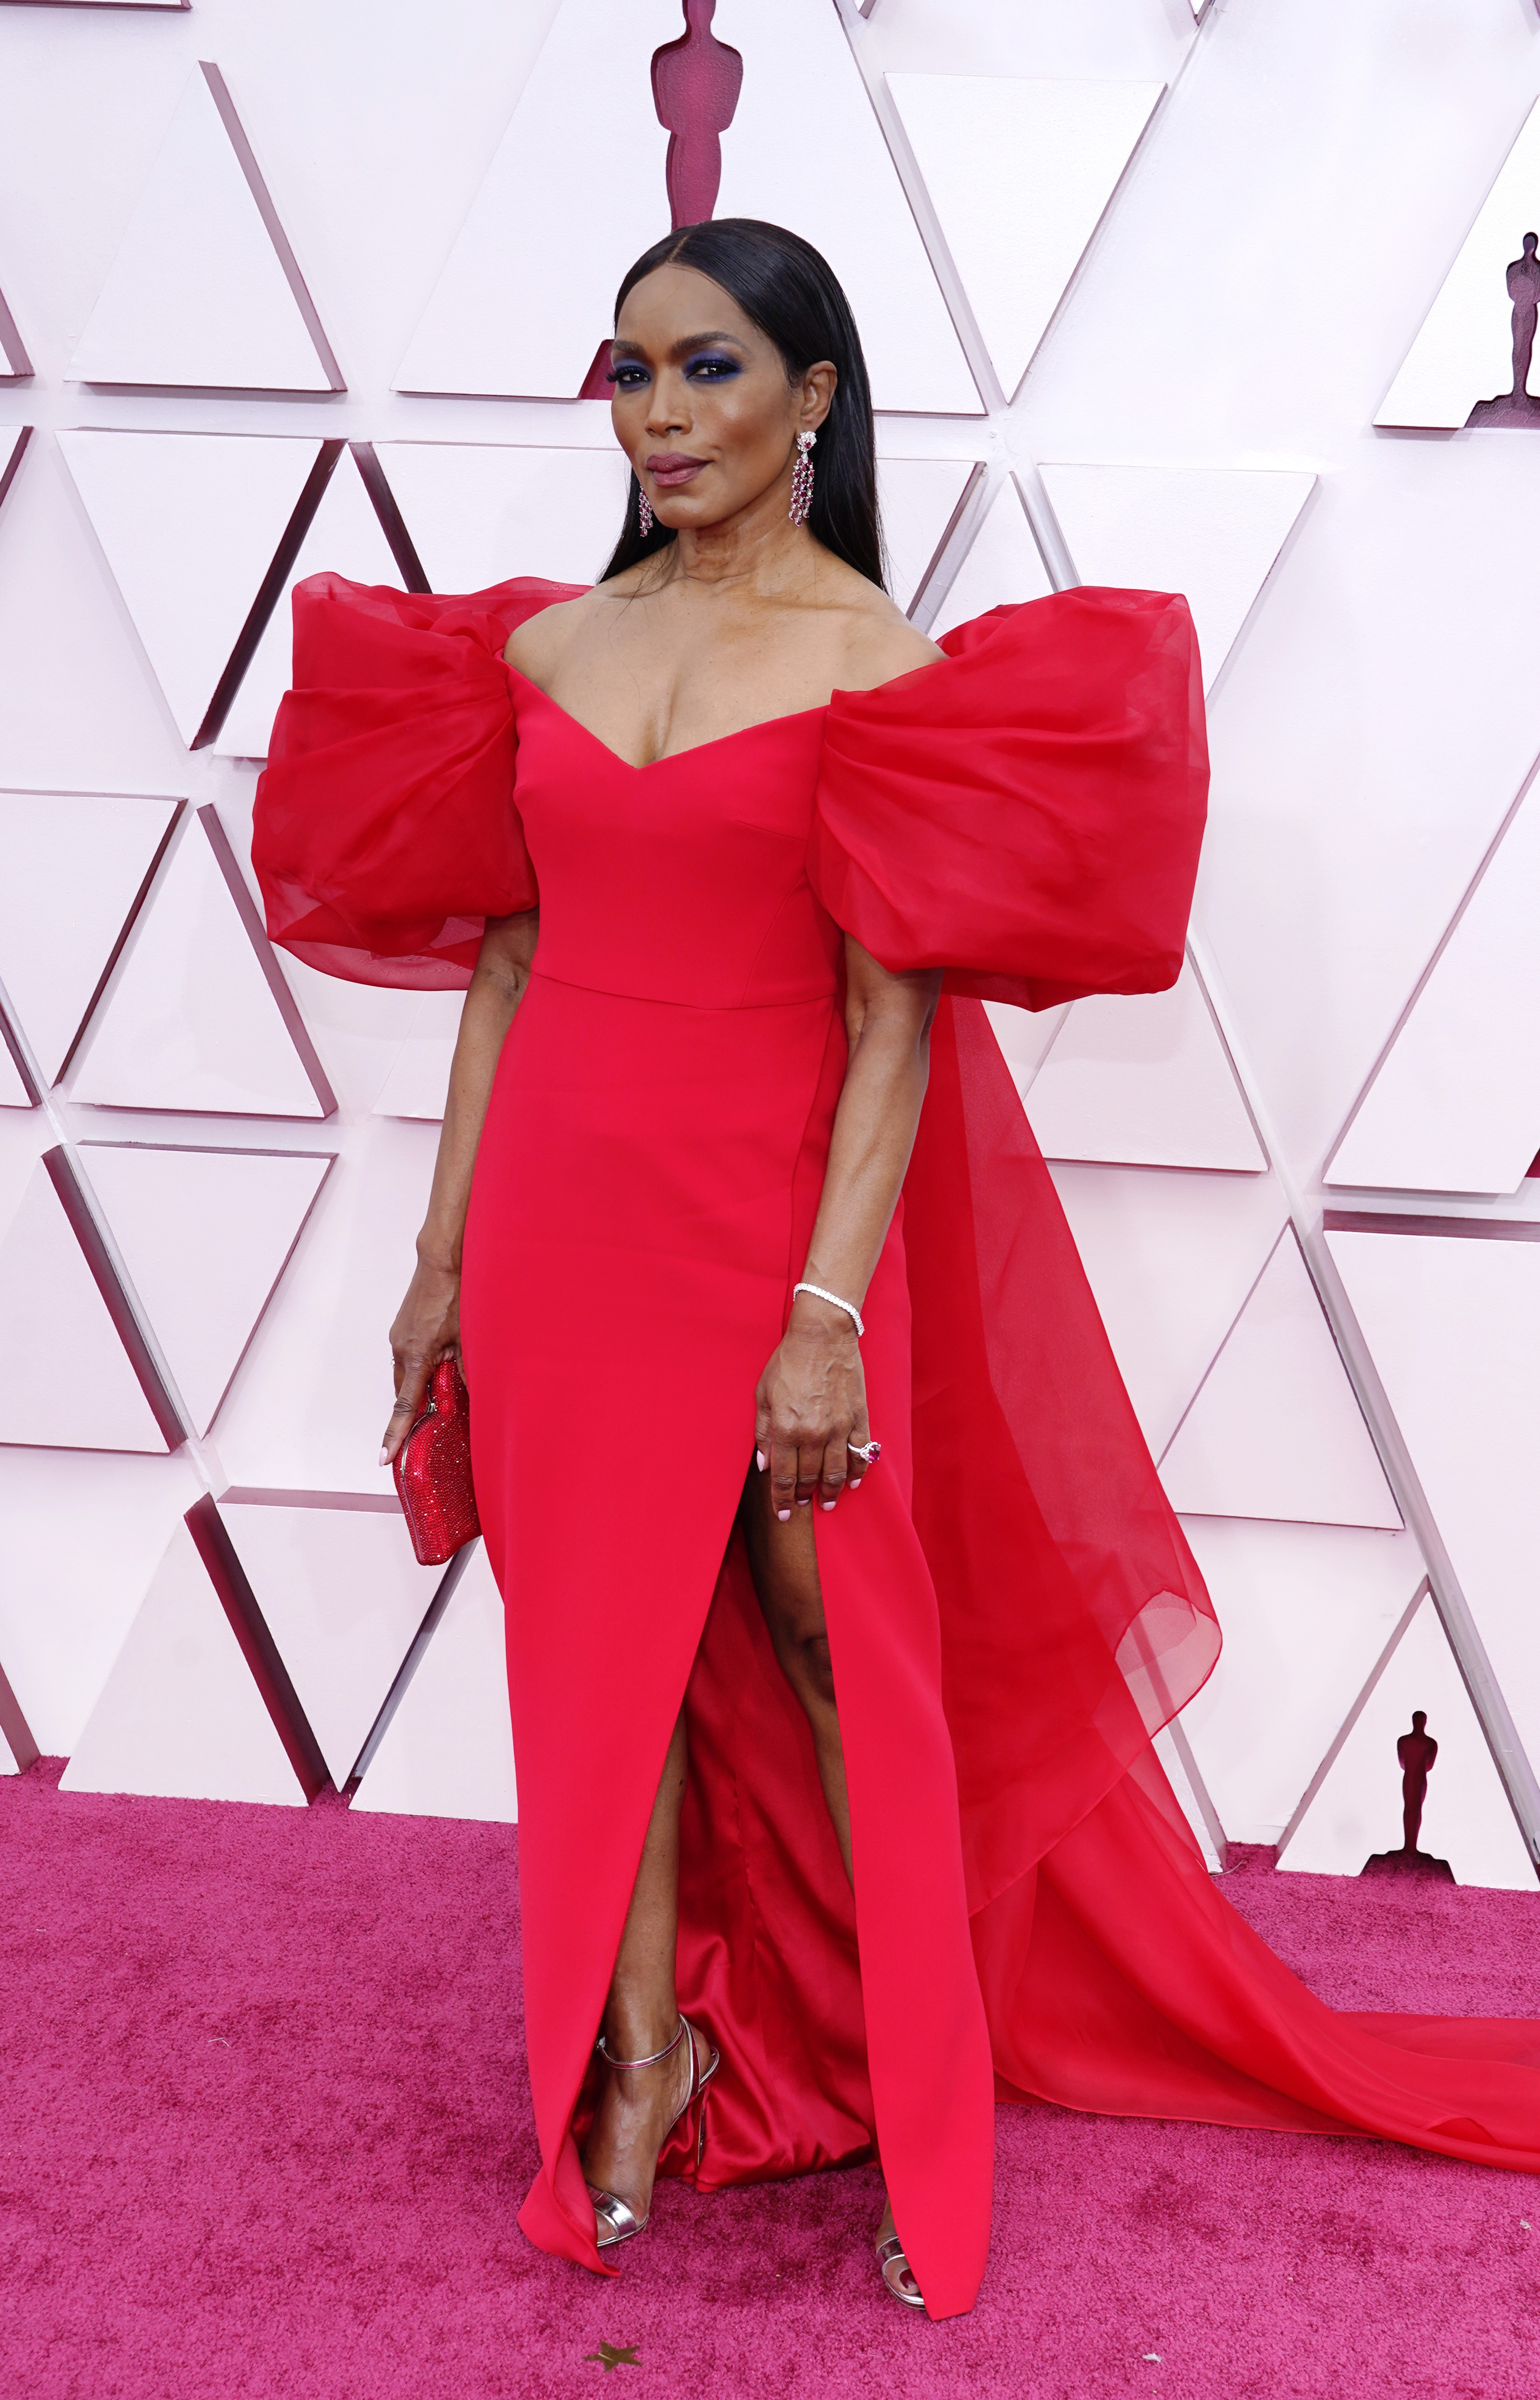 LOS ANGELES, CALIFORNIA – APRIL 25: Angela Bassett attends the 93rd Annual Academy Awards at Union Station on April 25, 2021 in Los Angeles, California. (Photo by Chris Pizzello-Pool/Getty Images) (Foto: Getty Images)